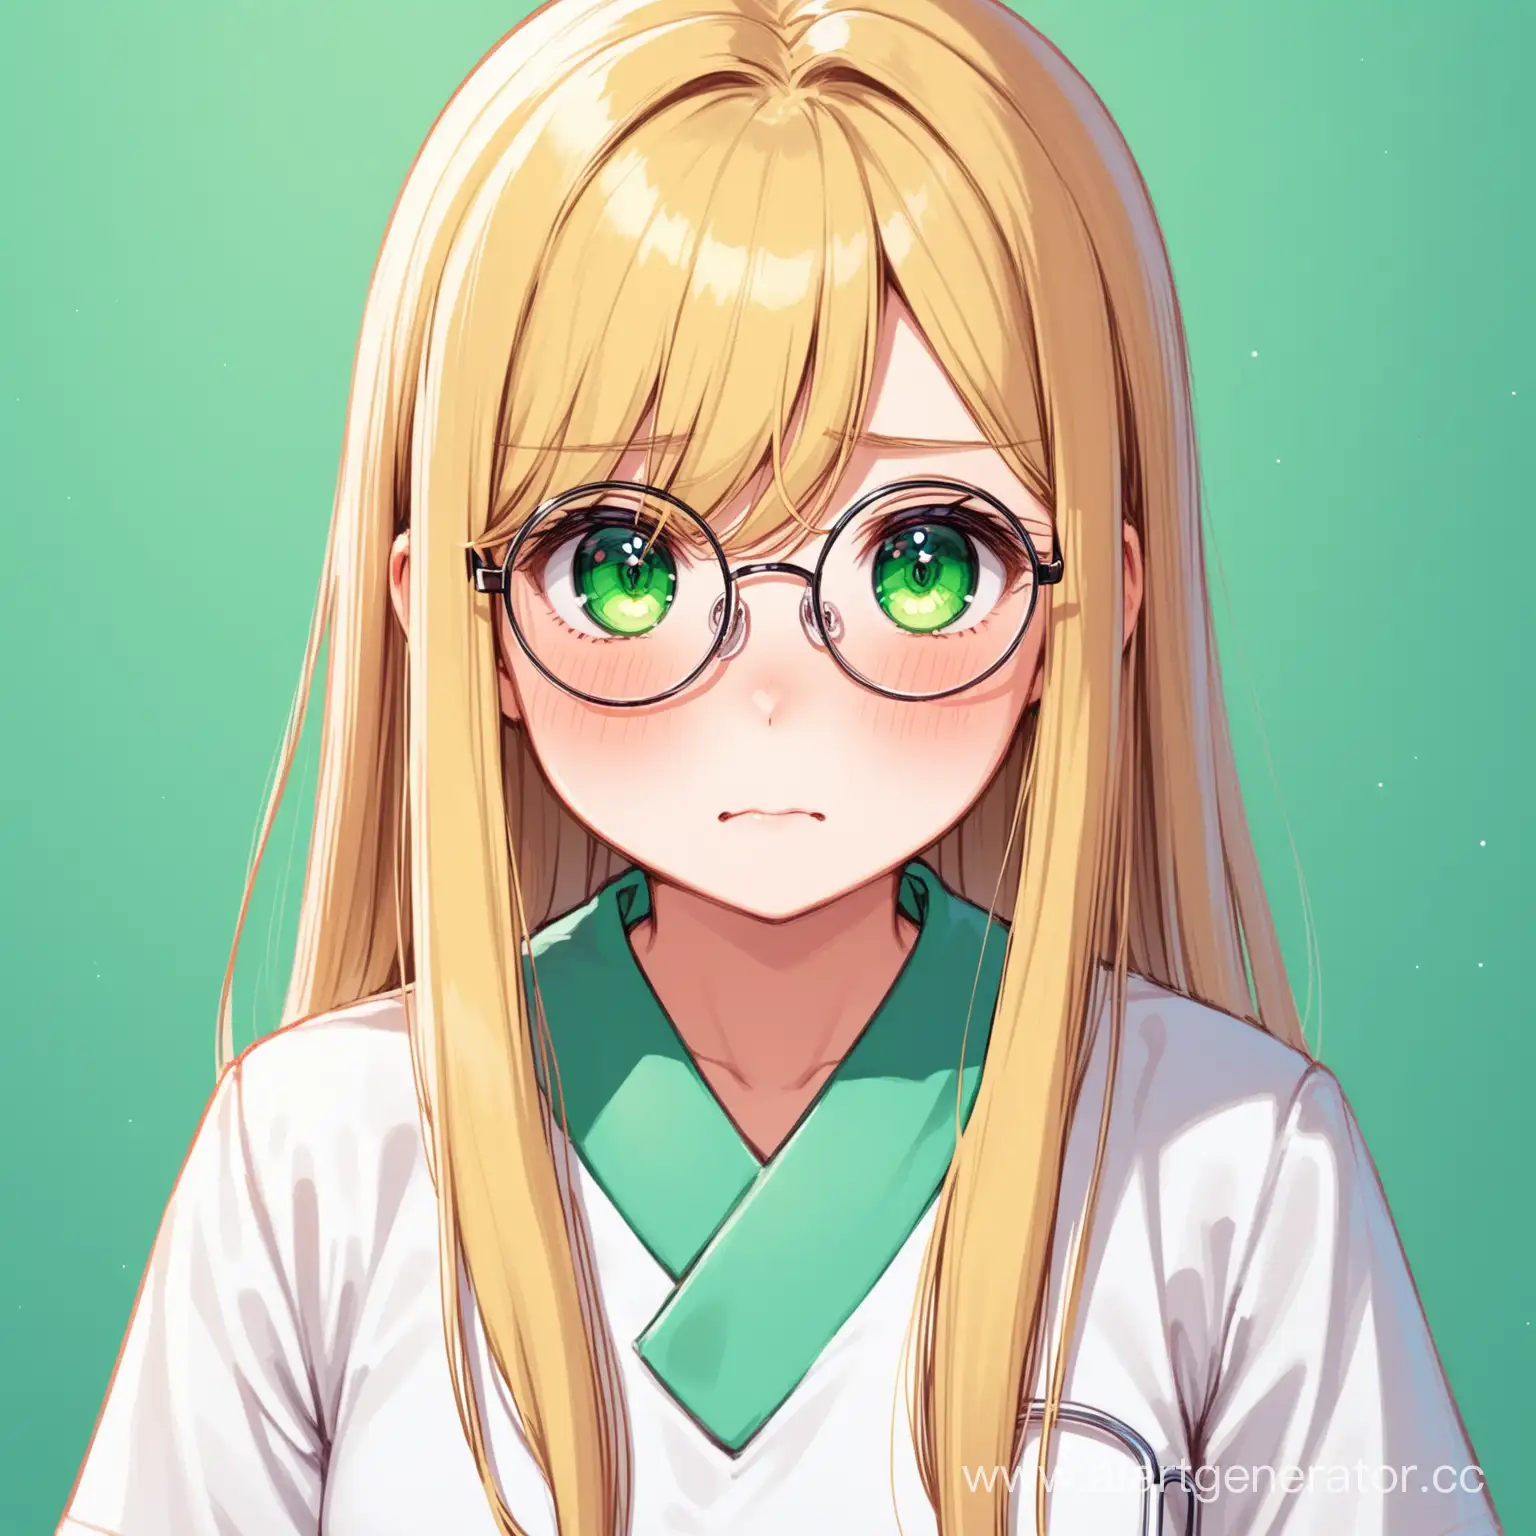 A girl, long straight blonde hair and big green eyes, She is wearing a medical dress and round glasses, She looks cute and embarrassed.

